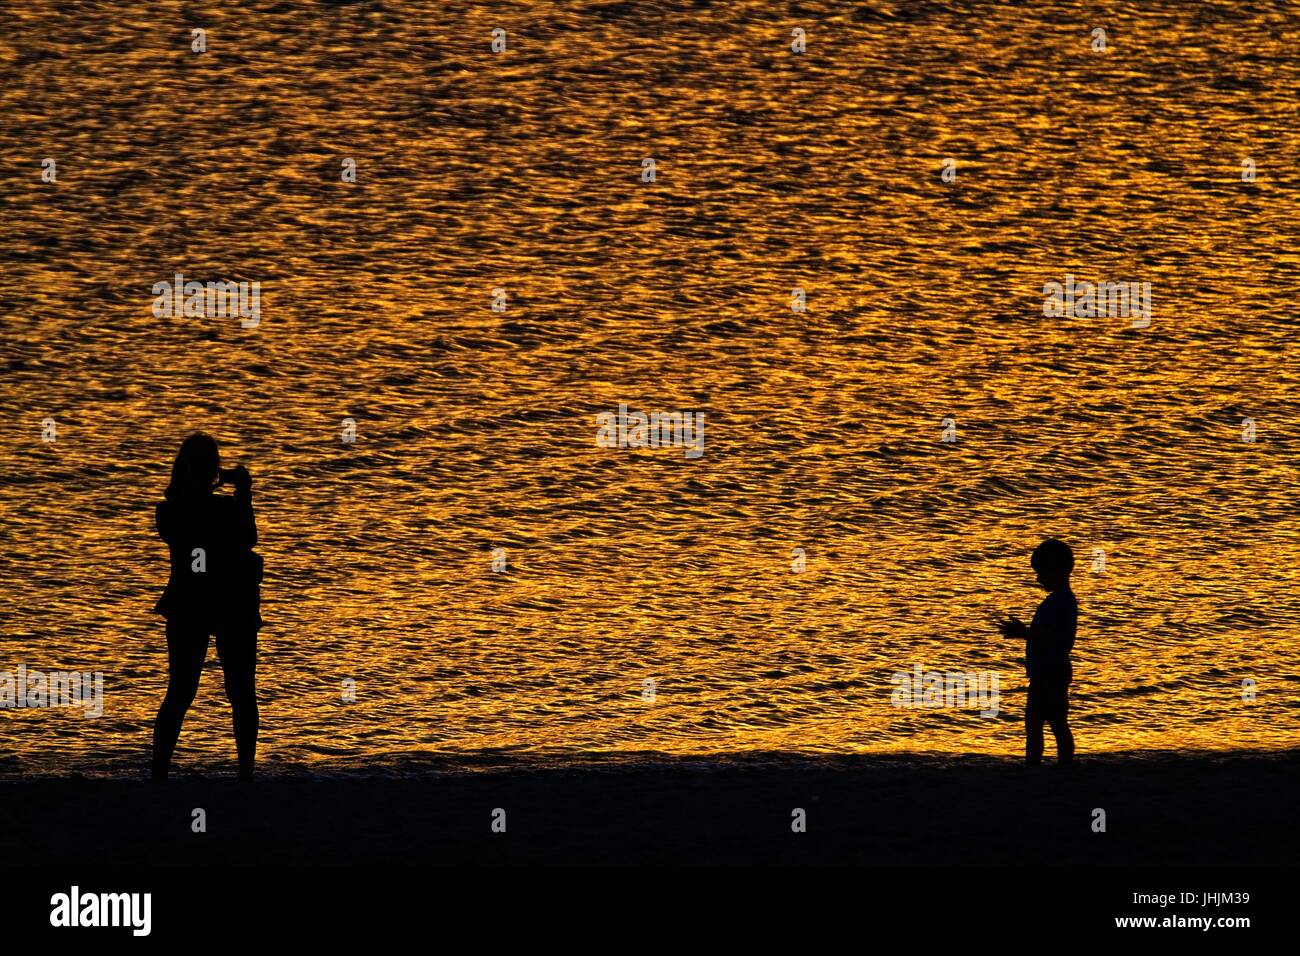 Golden sunset. Seaside. Silhouettes of mother and child. Stock Photo